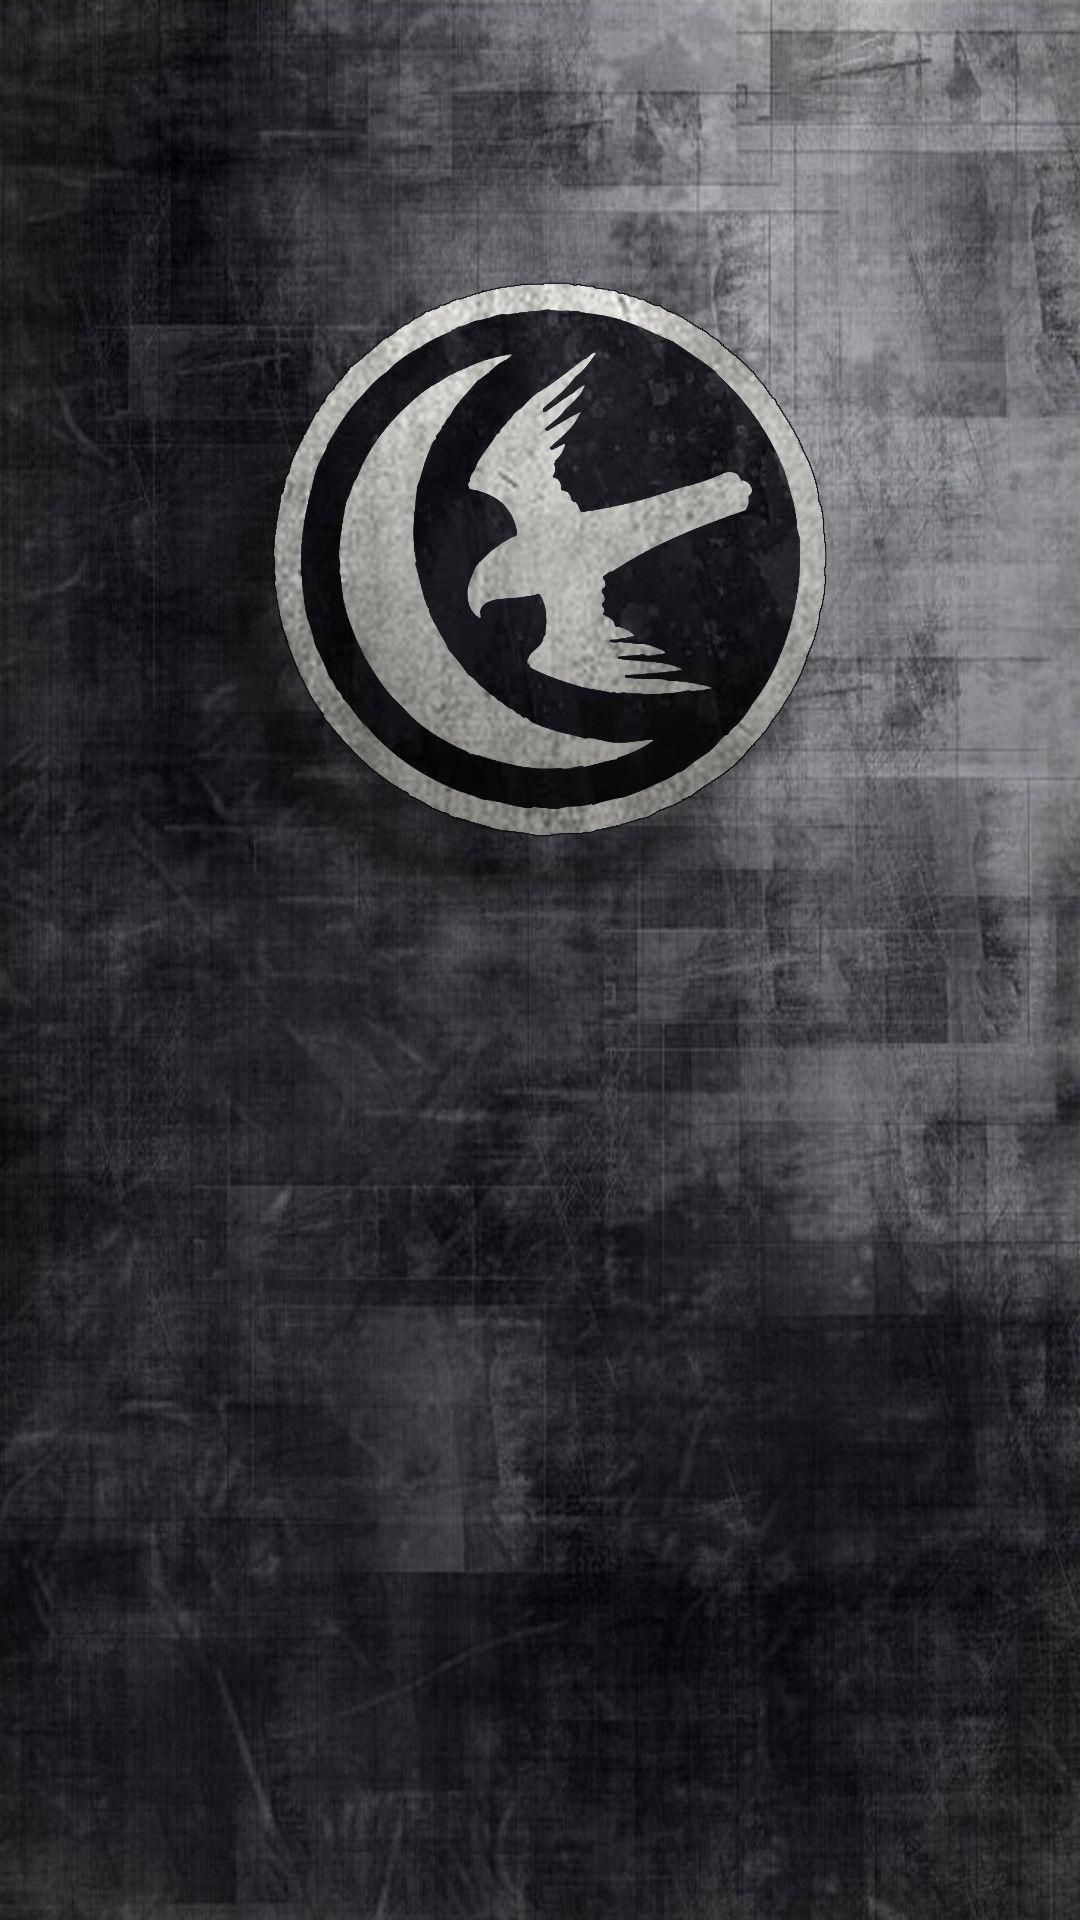 No Spoilers Decided to make some phone wallpaper, Enjoy